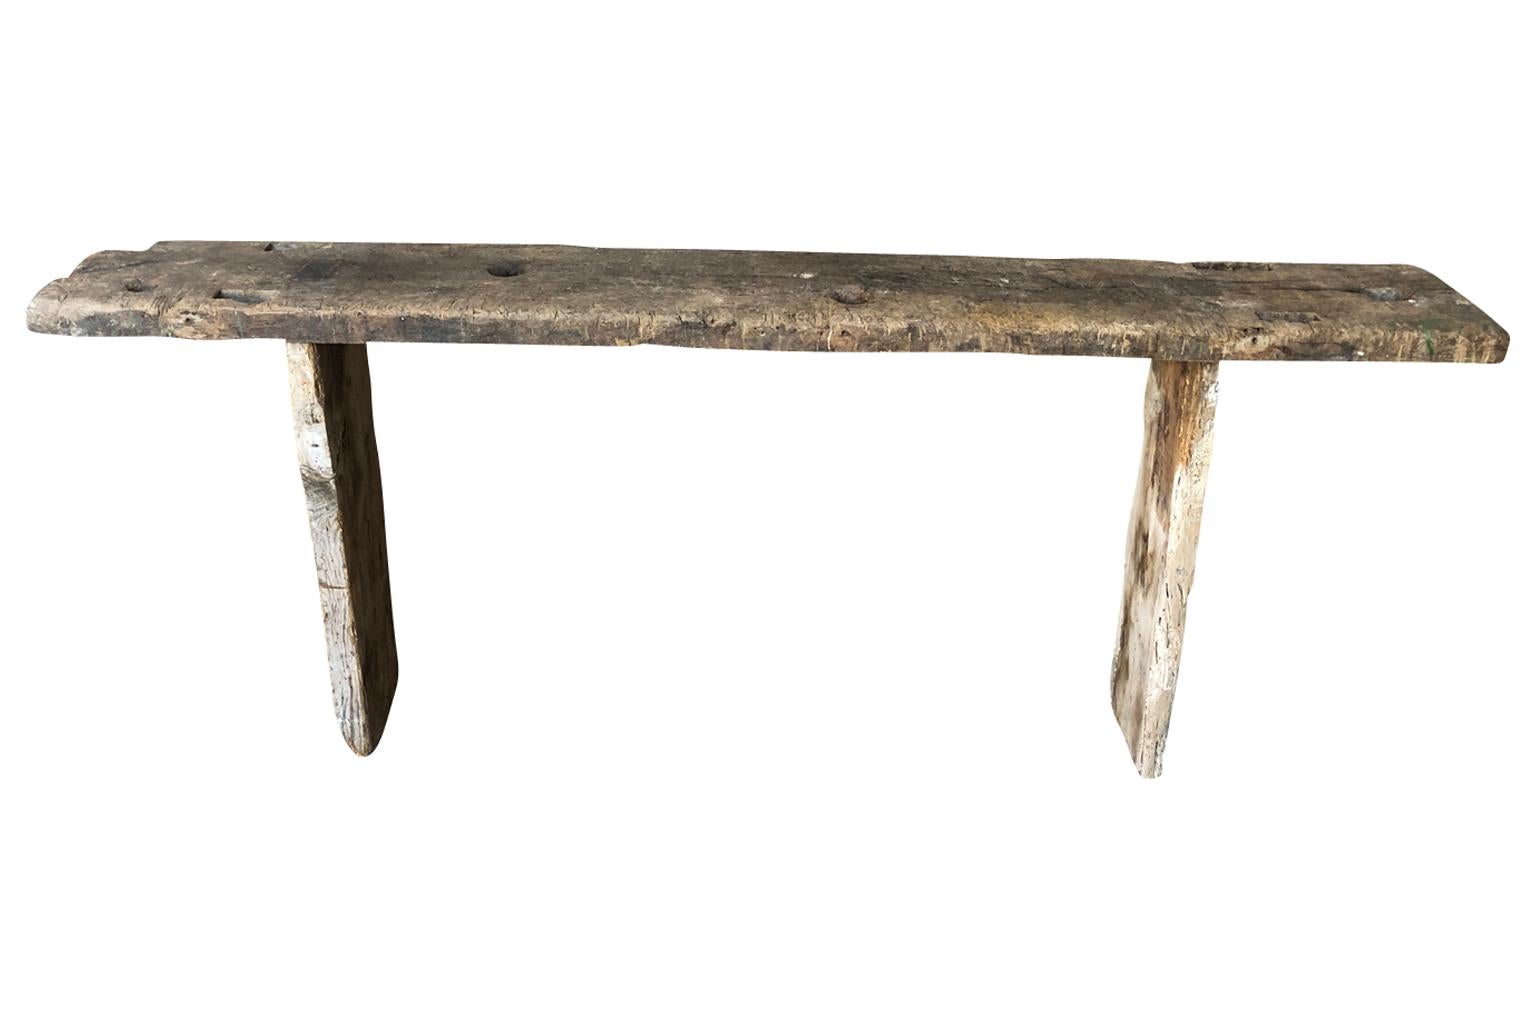 A very handsome early 19th century Primitive Spanish work table - console in naturally washed oak. Its Minimalist form blends beautifully with rustic as well as contemporary.